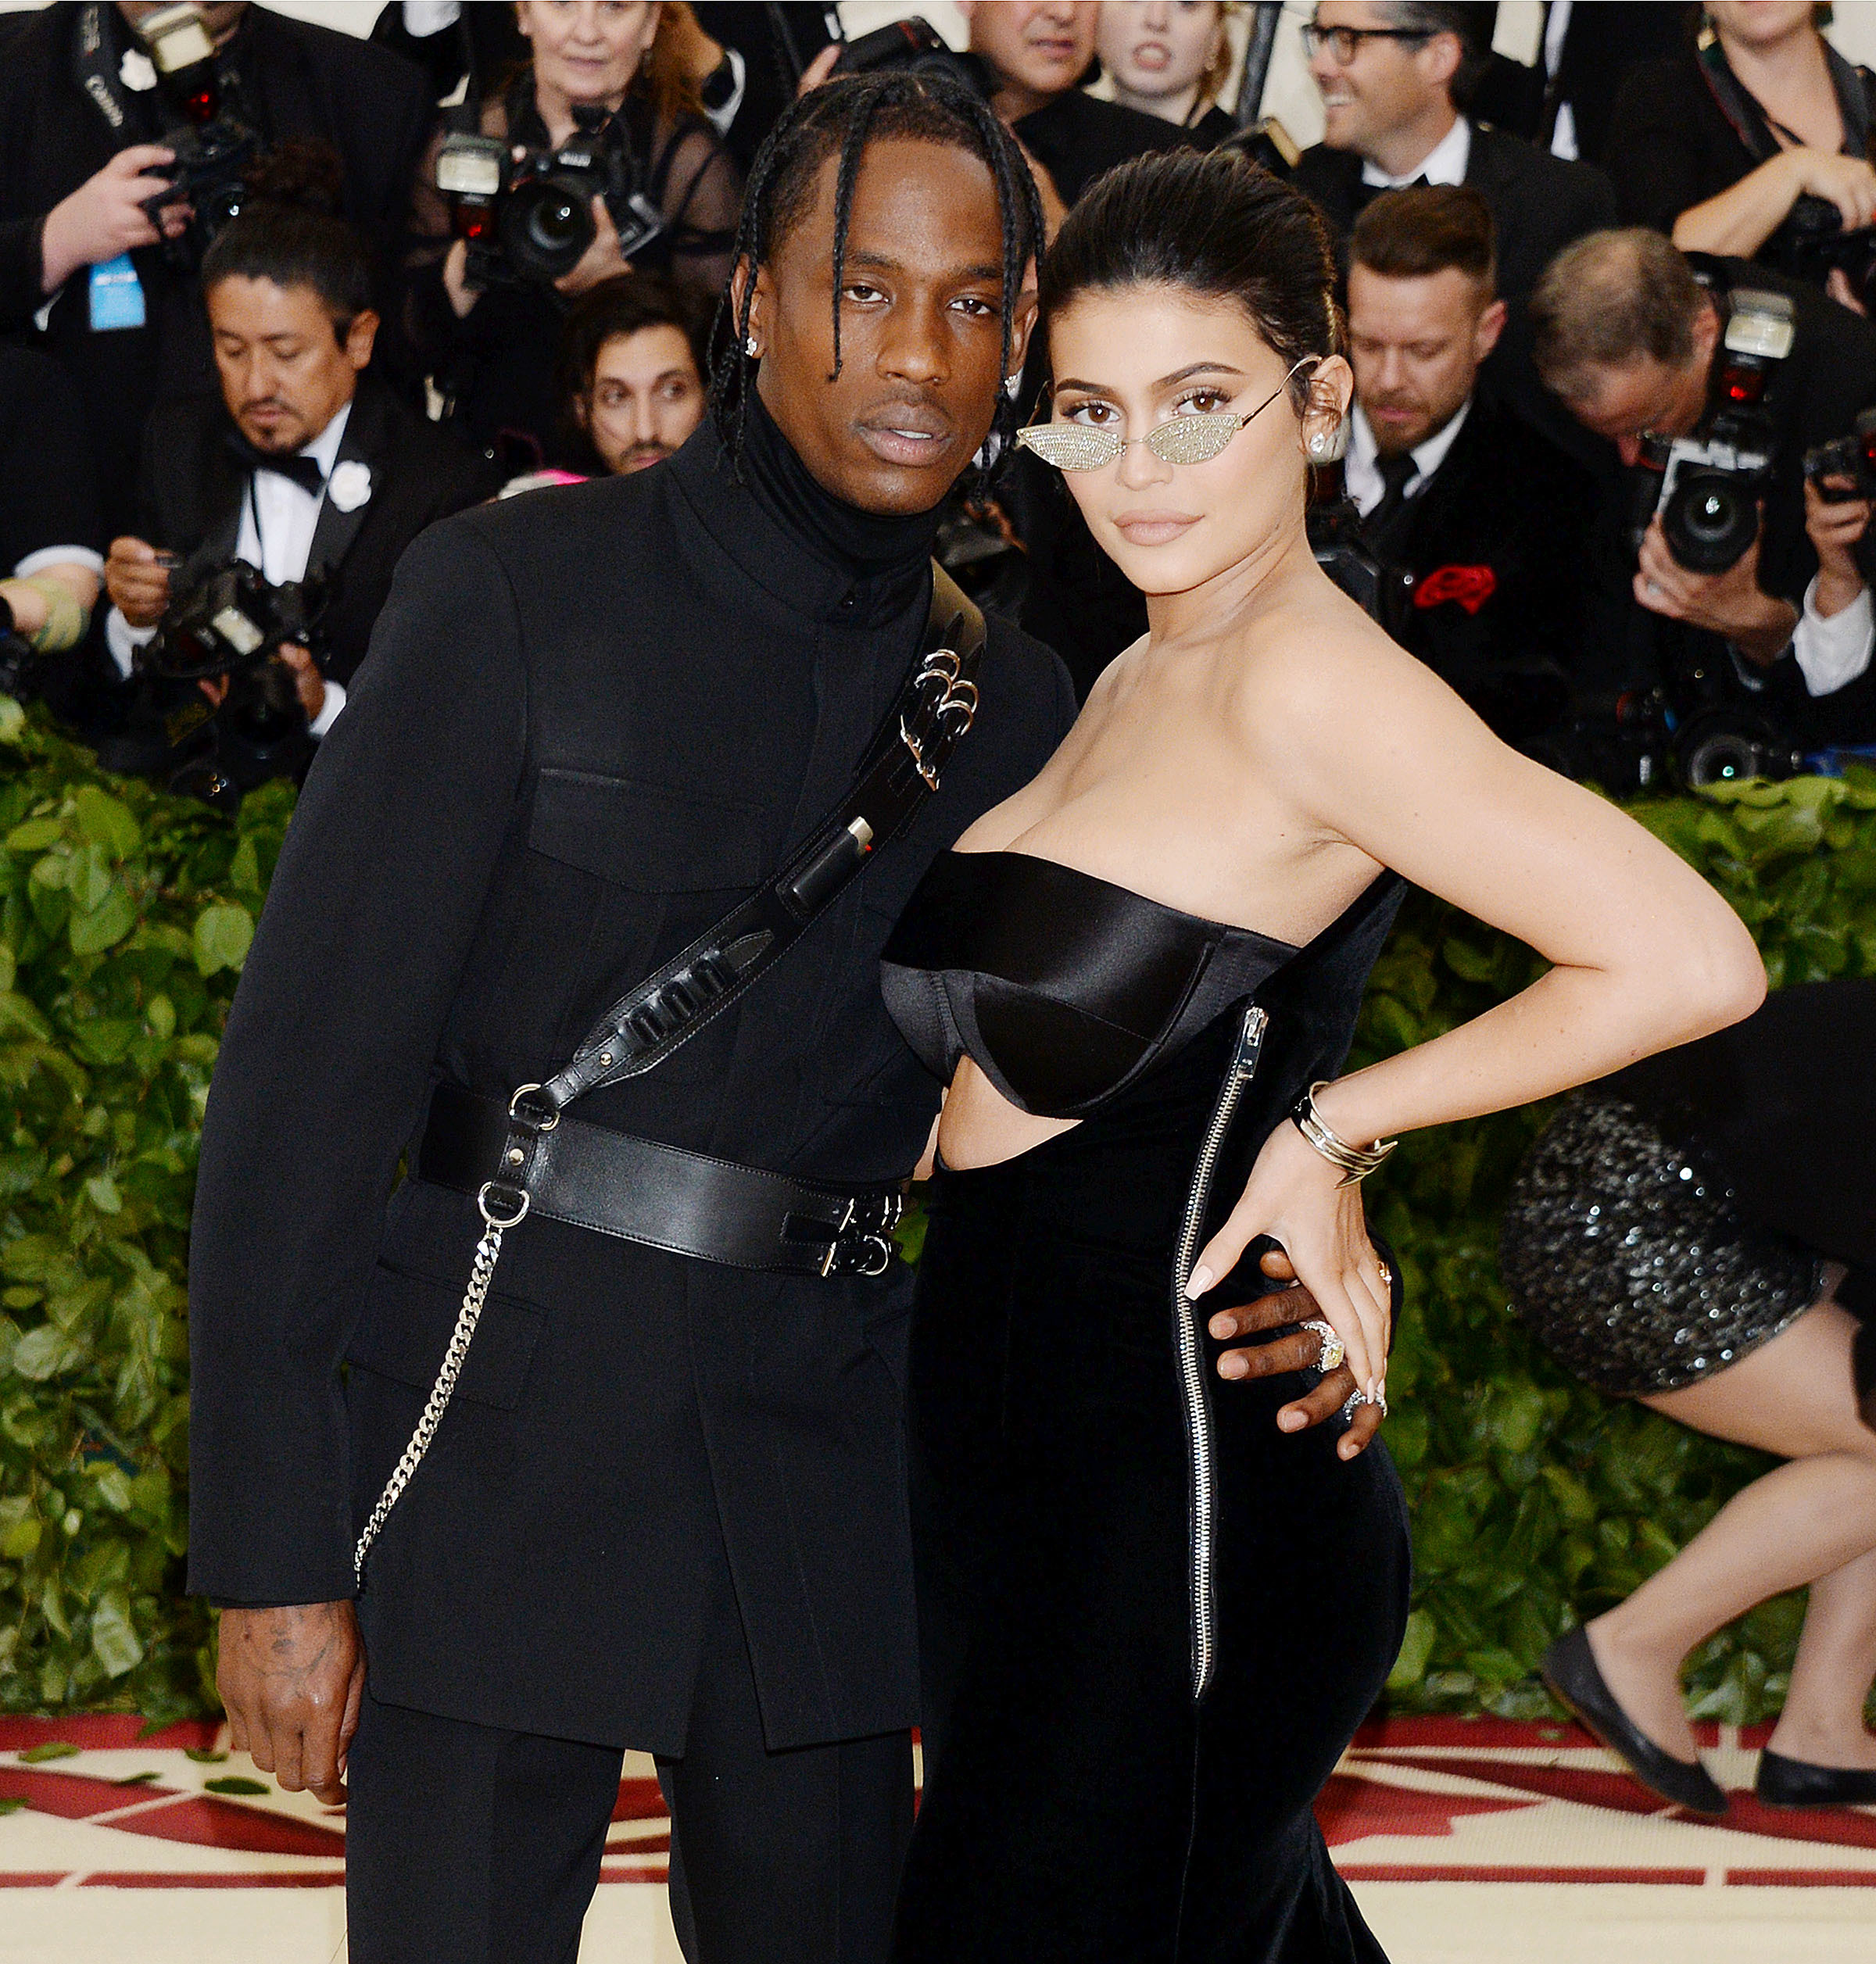 <p><a href="https://www.wonderwall.com/celebrity/profiles/overview/kylie-jenner-1413.article">Kylie Jenner</a> and Travis Scott don't remember exactly where they first met, but their first date -- which she says wasn't even really a first date, but more of a hang that went well, <a href="https://www.gq.com/story/kylie-travis-cover-2018">GQ</a> reported in July 2018 -- was at the <a href="https://www.wonderwall.com/celebrity/coachella-2017-vanessa-hudgens-alessandra-ambrosio-and-more-stars-3005324.gallery">2017 Coachella Valley Music and Arts Festival</a>. "Coachella was one of the stops on his tour," Kylie told GQ. "So he said, 'I'm going back on tour -- what do we want to do about <i>this</i>?' Because we obviously liked each other. And I was like, 'I guess I'm going with you.' I really jumped on the [tour] bus. And then we rode off into the sunset. I did the whole tour with him." That tour is where they really got to know one another and, it seems clear now, where she got pregnant with their daughter, <a href="https://www.wonderwall.com/news/kylie-jenner-reveals-her-babys-name-3012473.article">Stormi, who was born</a> in February 2018. "We had a lot of downtime. It was organic. And we would just go to these random cities," Kylie explained. "We got to not be who we really were. Like, if we were in L.A., I feel like it would've been way different. Everything happened for a reason. We weren't going out as 'Kylie and Trav.' We would just be in Cleveland, walking the street for hours. We would go on walks, and no one would bother us." The pair split in 2019 but <a href="https://www.tmz.com/2021/05/21/kylie-jenner-travis-scott-back-together-not-exclusive-open-relationship/">reconnected romantically</a> in 2021. In February 2022, they welcomed <a href="https://www.wonderwall.com/celebrity/celebrities-who-gave-birth-in-2022-stars-who-welcomed-babies-or-adopted-this-year-546256.gallery">son Wolf</a>.</p>